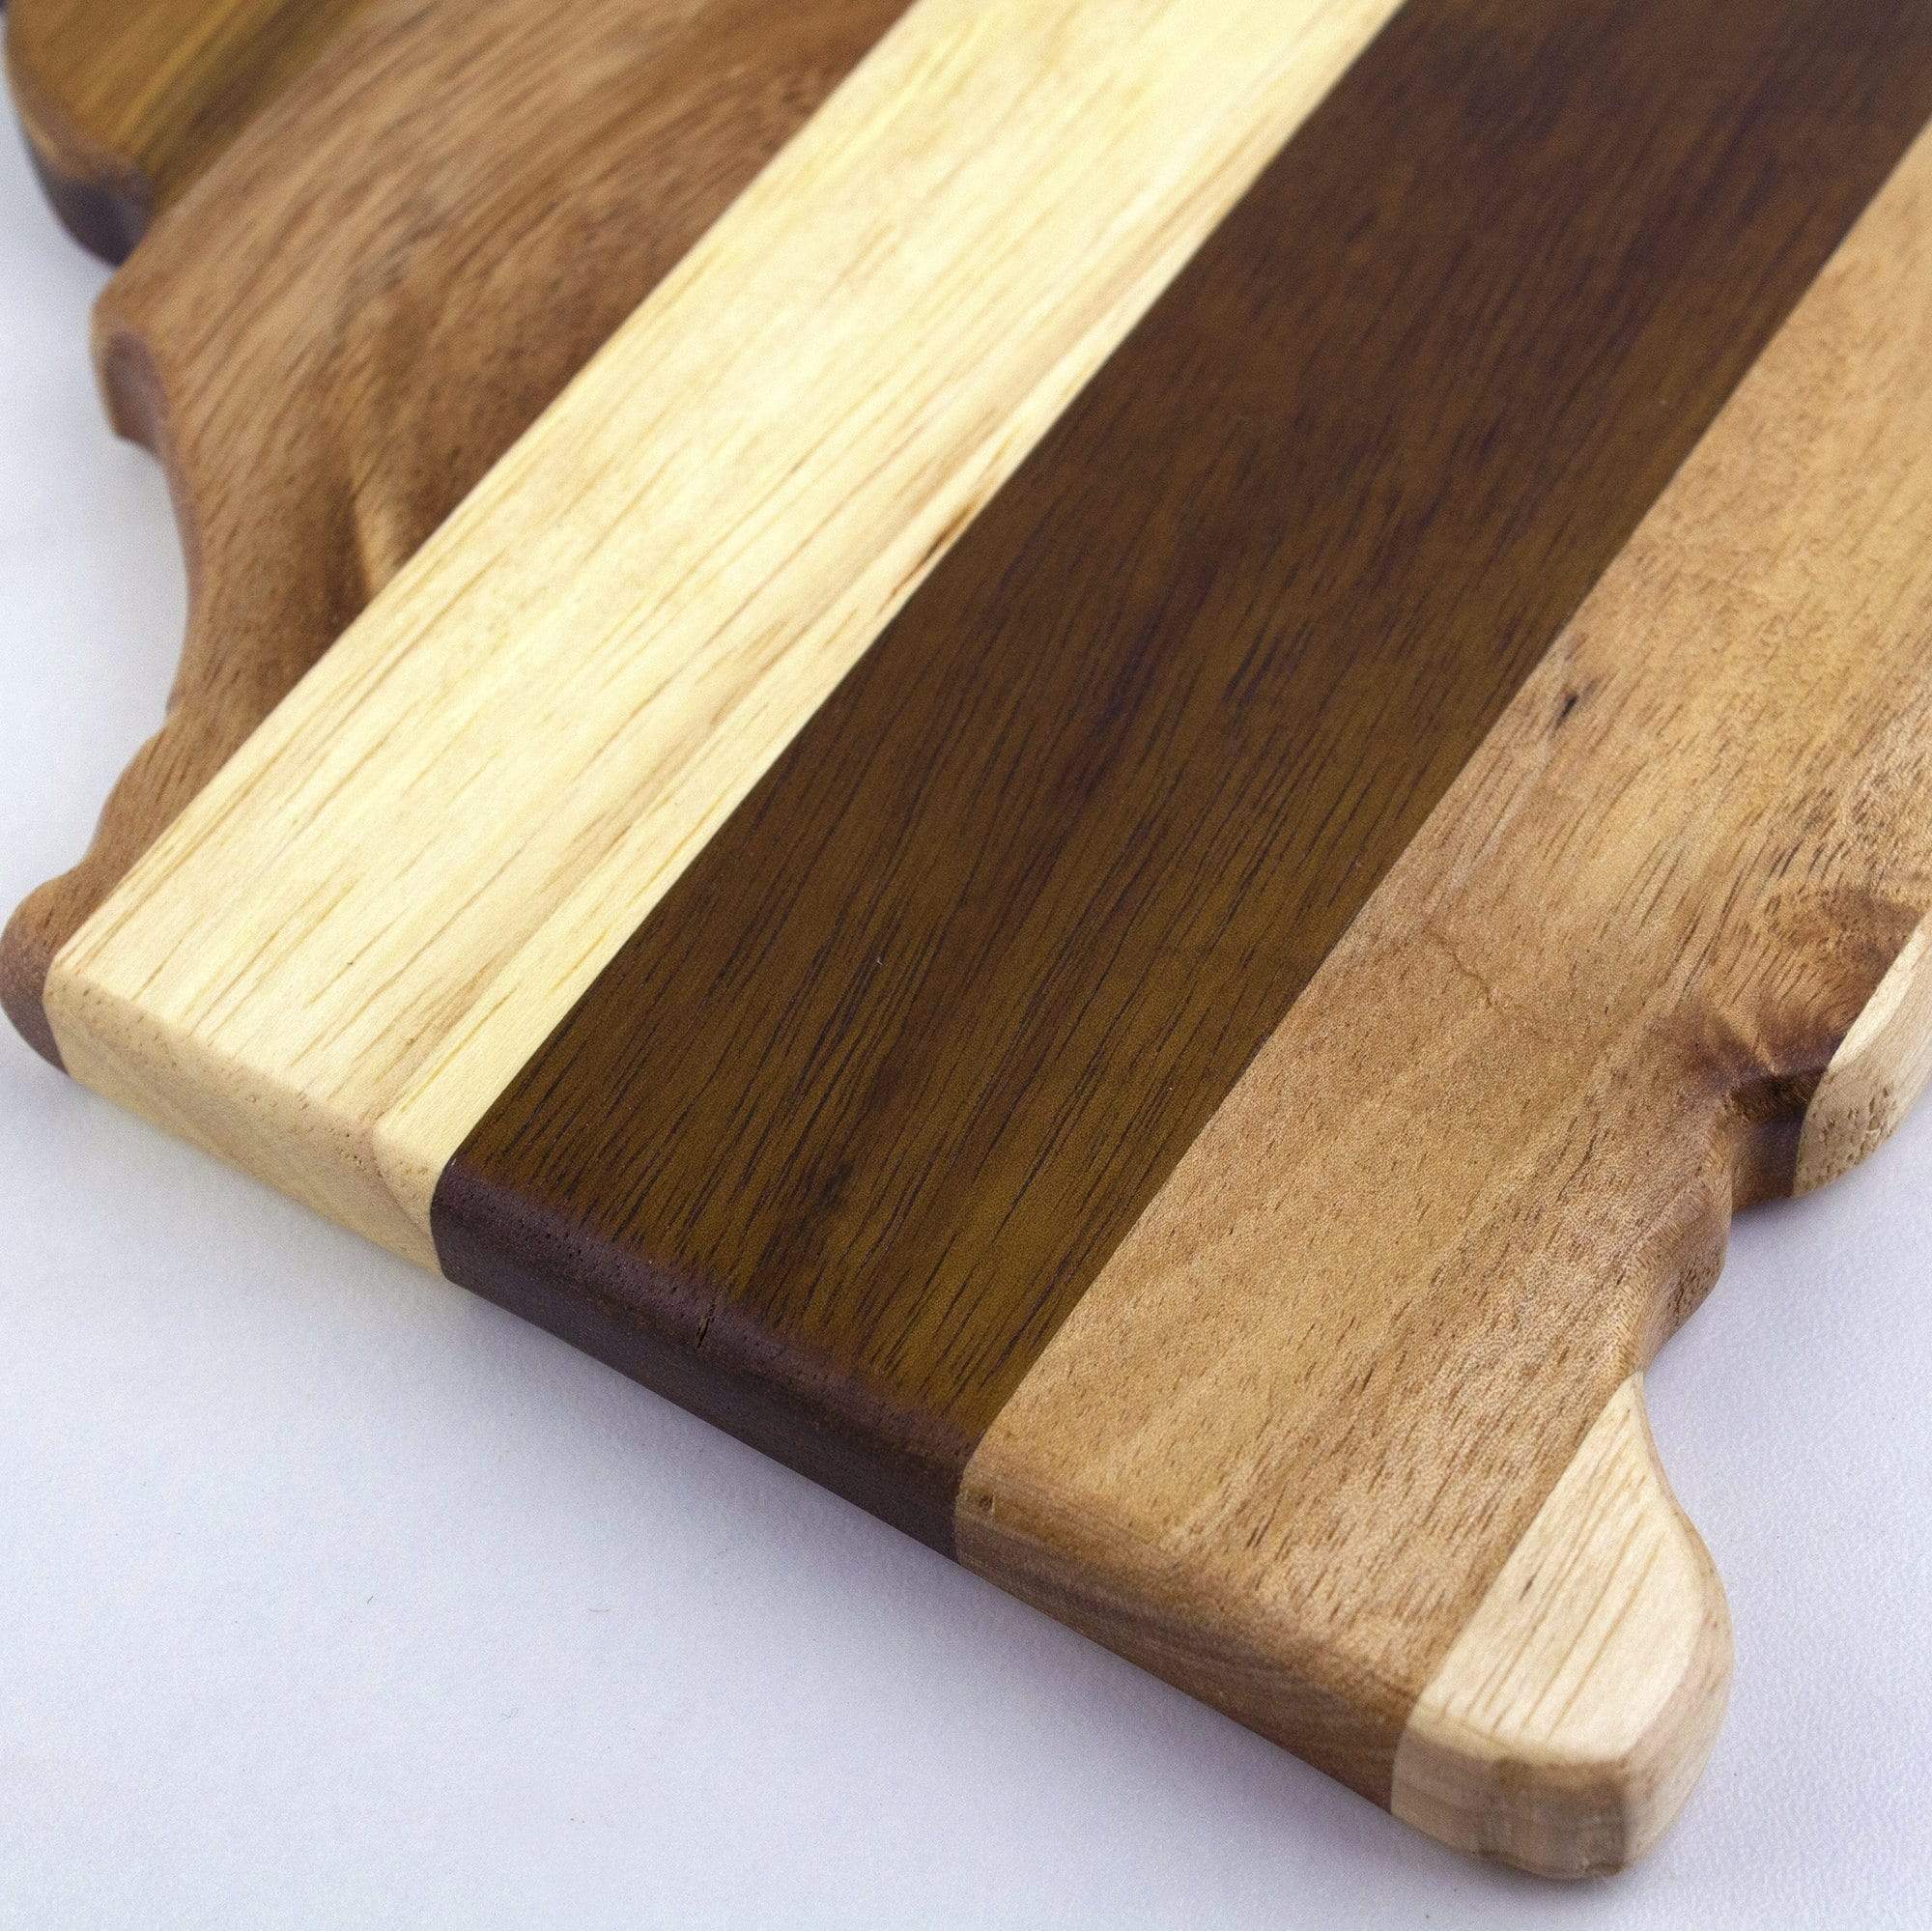 Totally Bamboo Rock & Branch® Shiplap Series California State Shaped Wood Serving and Cutting Board